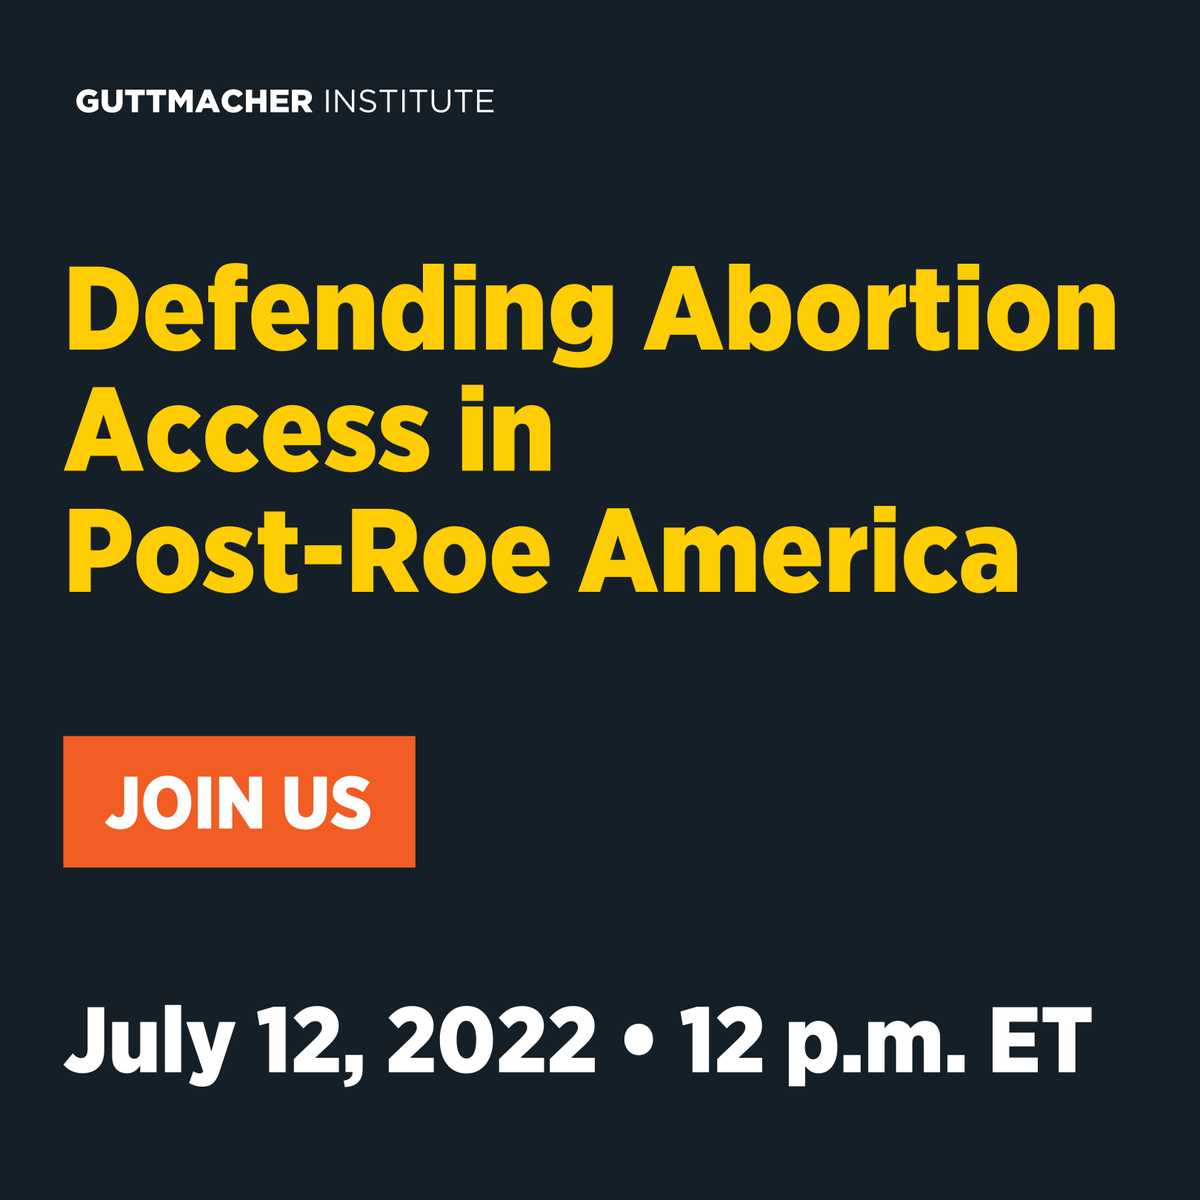 Save the date: Join us & our allies @FundTexasChoice & @access_rj for a webinar on the aftermath of SCOTUS’ decision to overturn #RoeVWade. We’ll discuss the latest state policy data & the future of US abortion access with experts from the field. Register: us02web.zoom.us/webinar/regist…